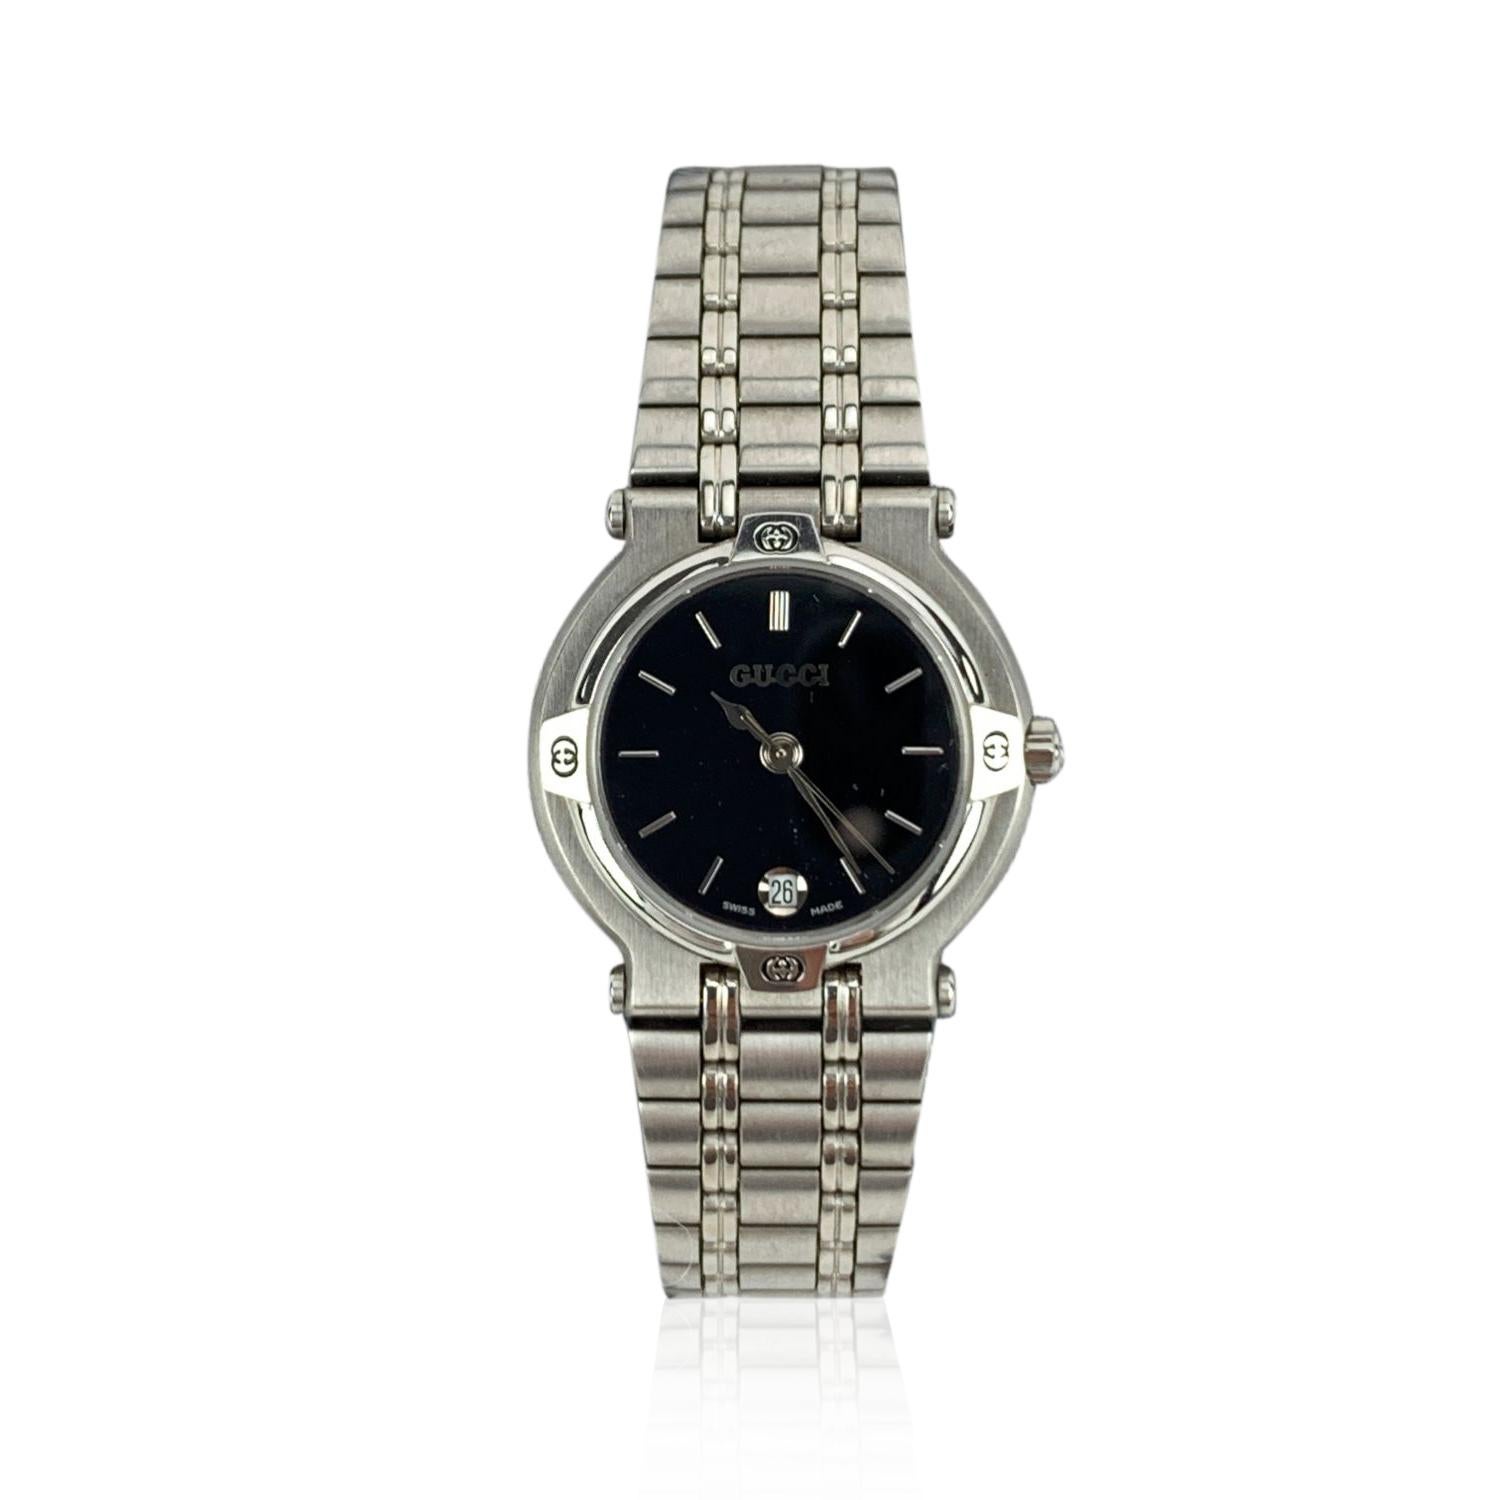 Gucci Vintage Stainless Steel Mod 9100 L Wrist Watch Black Dial 5